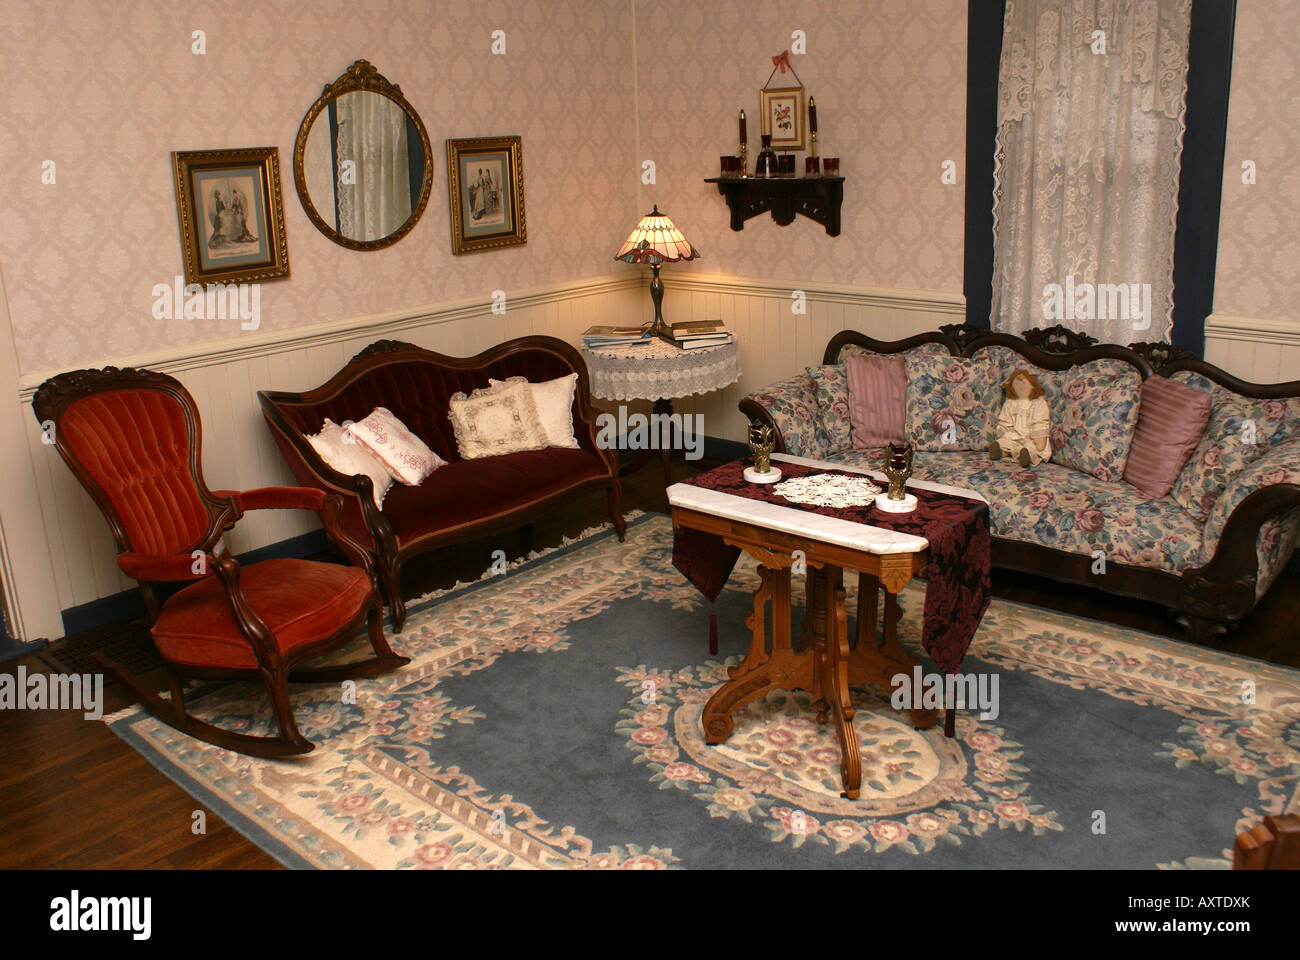 Old Fashioned Living Room Stock Photo Royalty Free Image